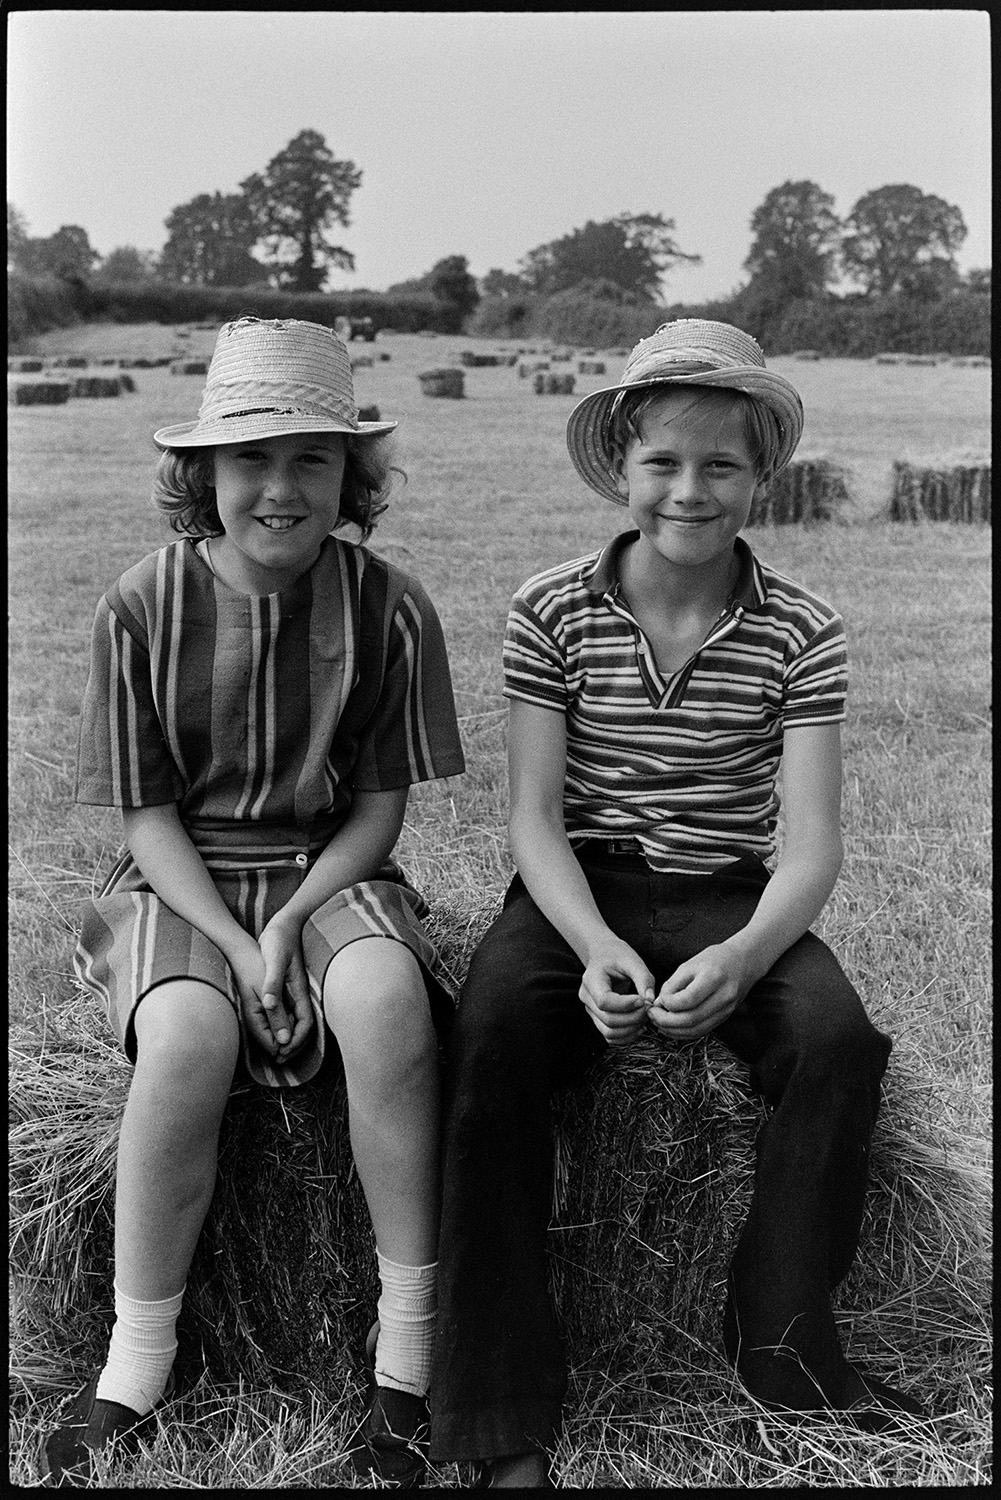 Family haymaking in field. 
[The Oke family twins, a girl and boy, sat on a hay bale in a field at Deckport, Hatherleigh. They are both wearing straw hats. Other hay bales can be seen in the background waiting to be collected.]